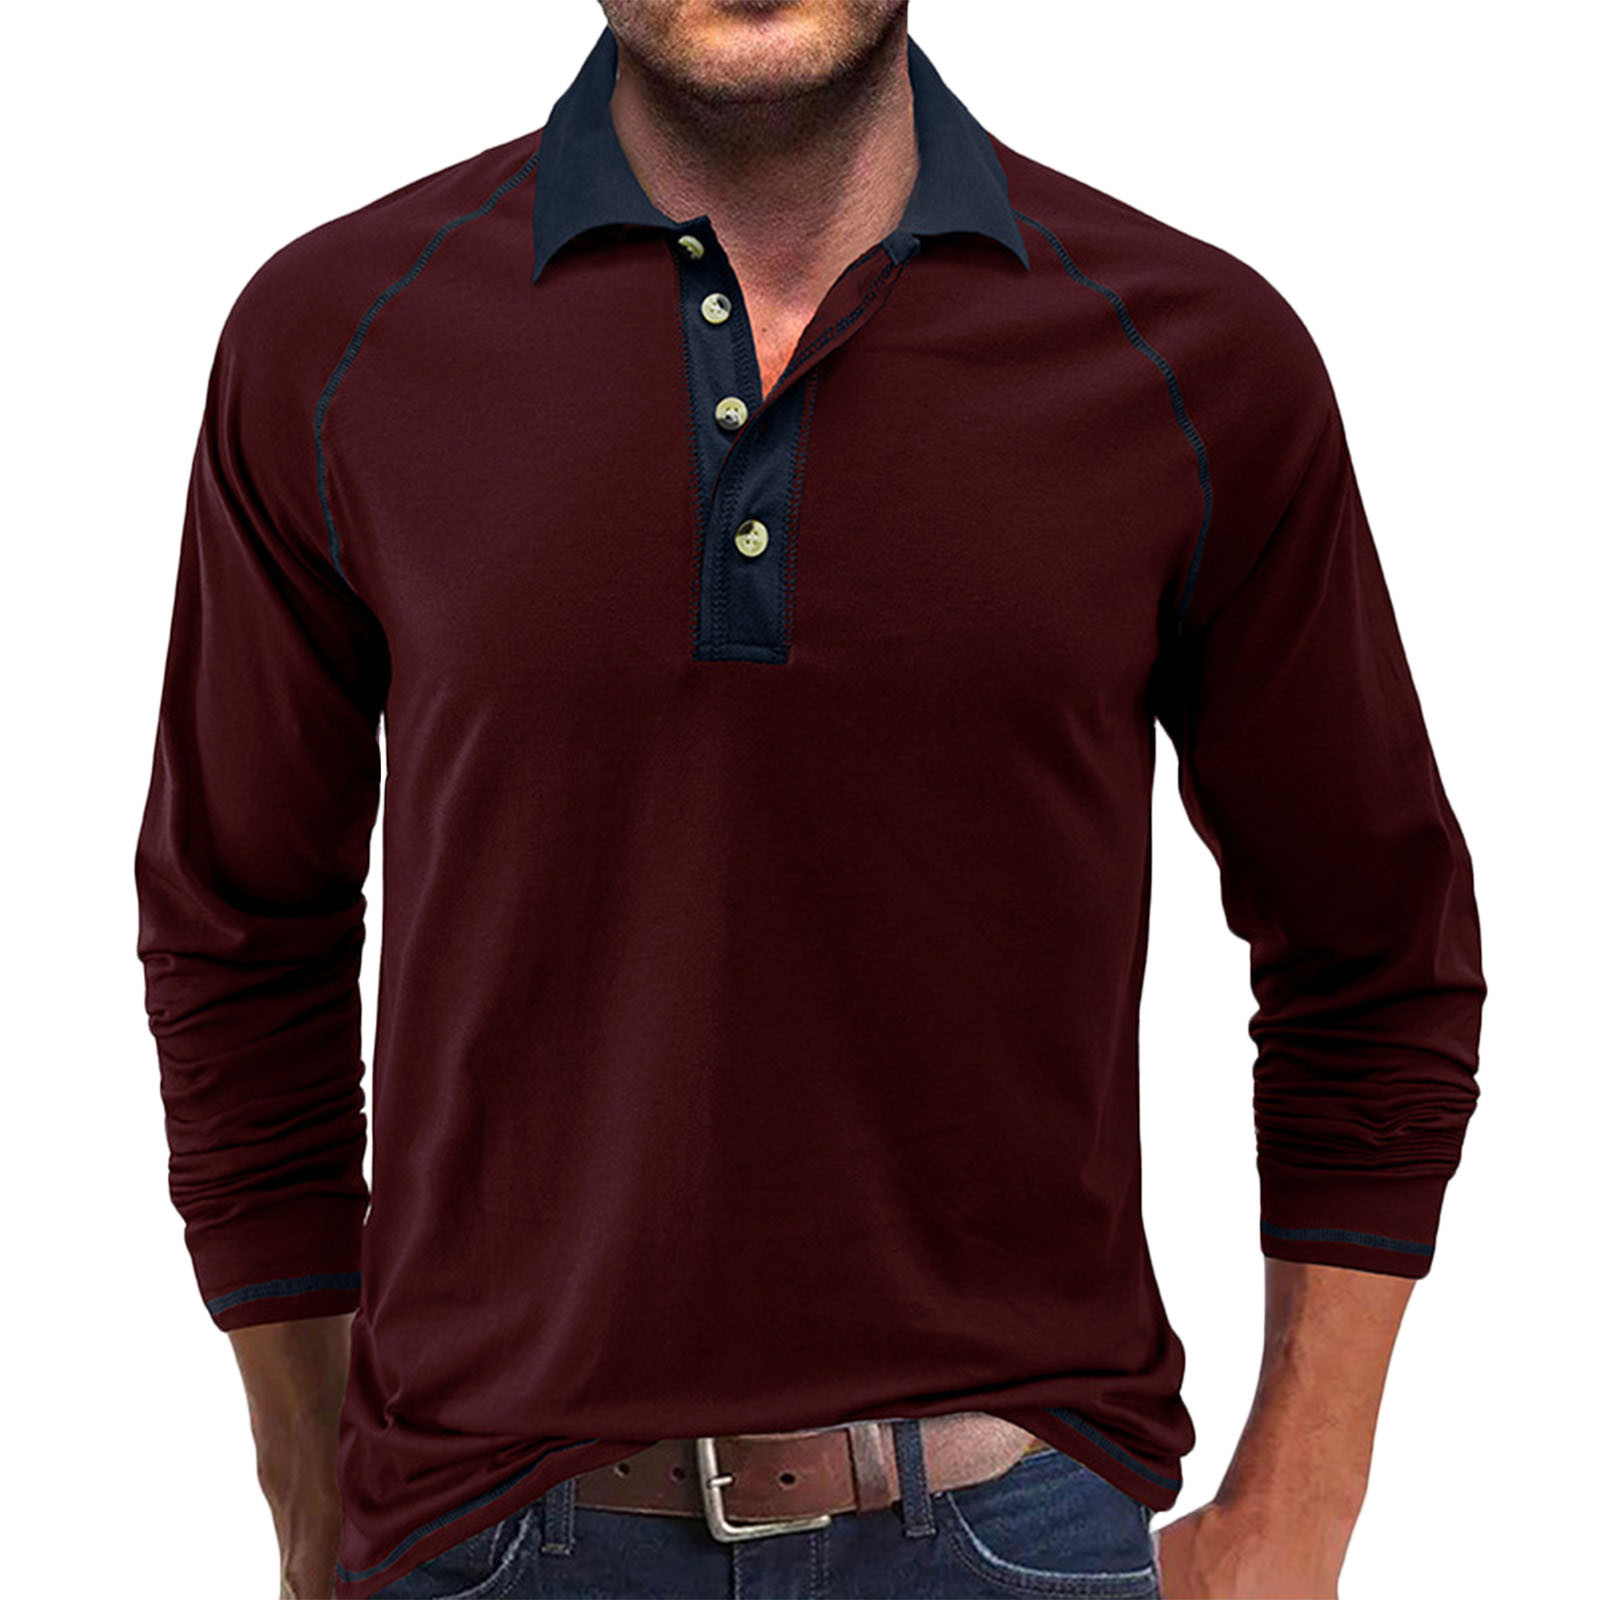 Bilqis Holiday Deals Men's Long Sleeve Polo Shirt with Pocket ...